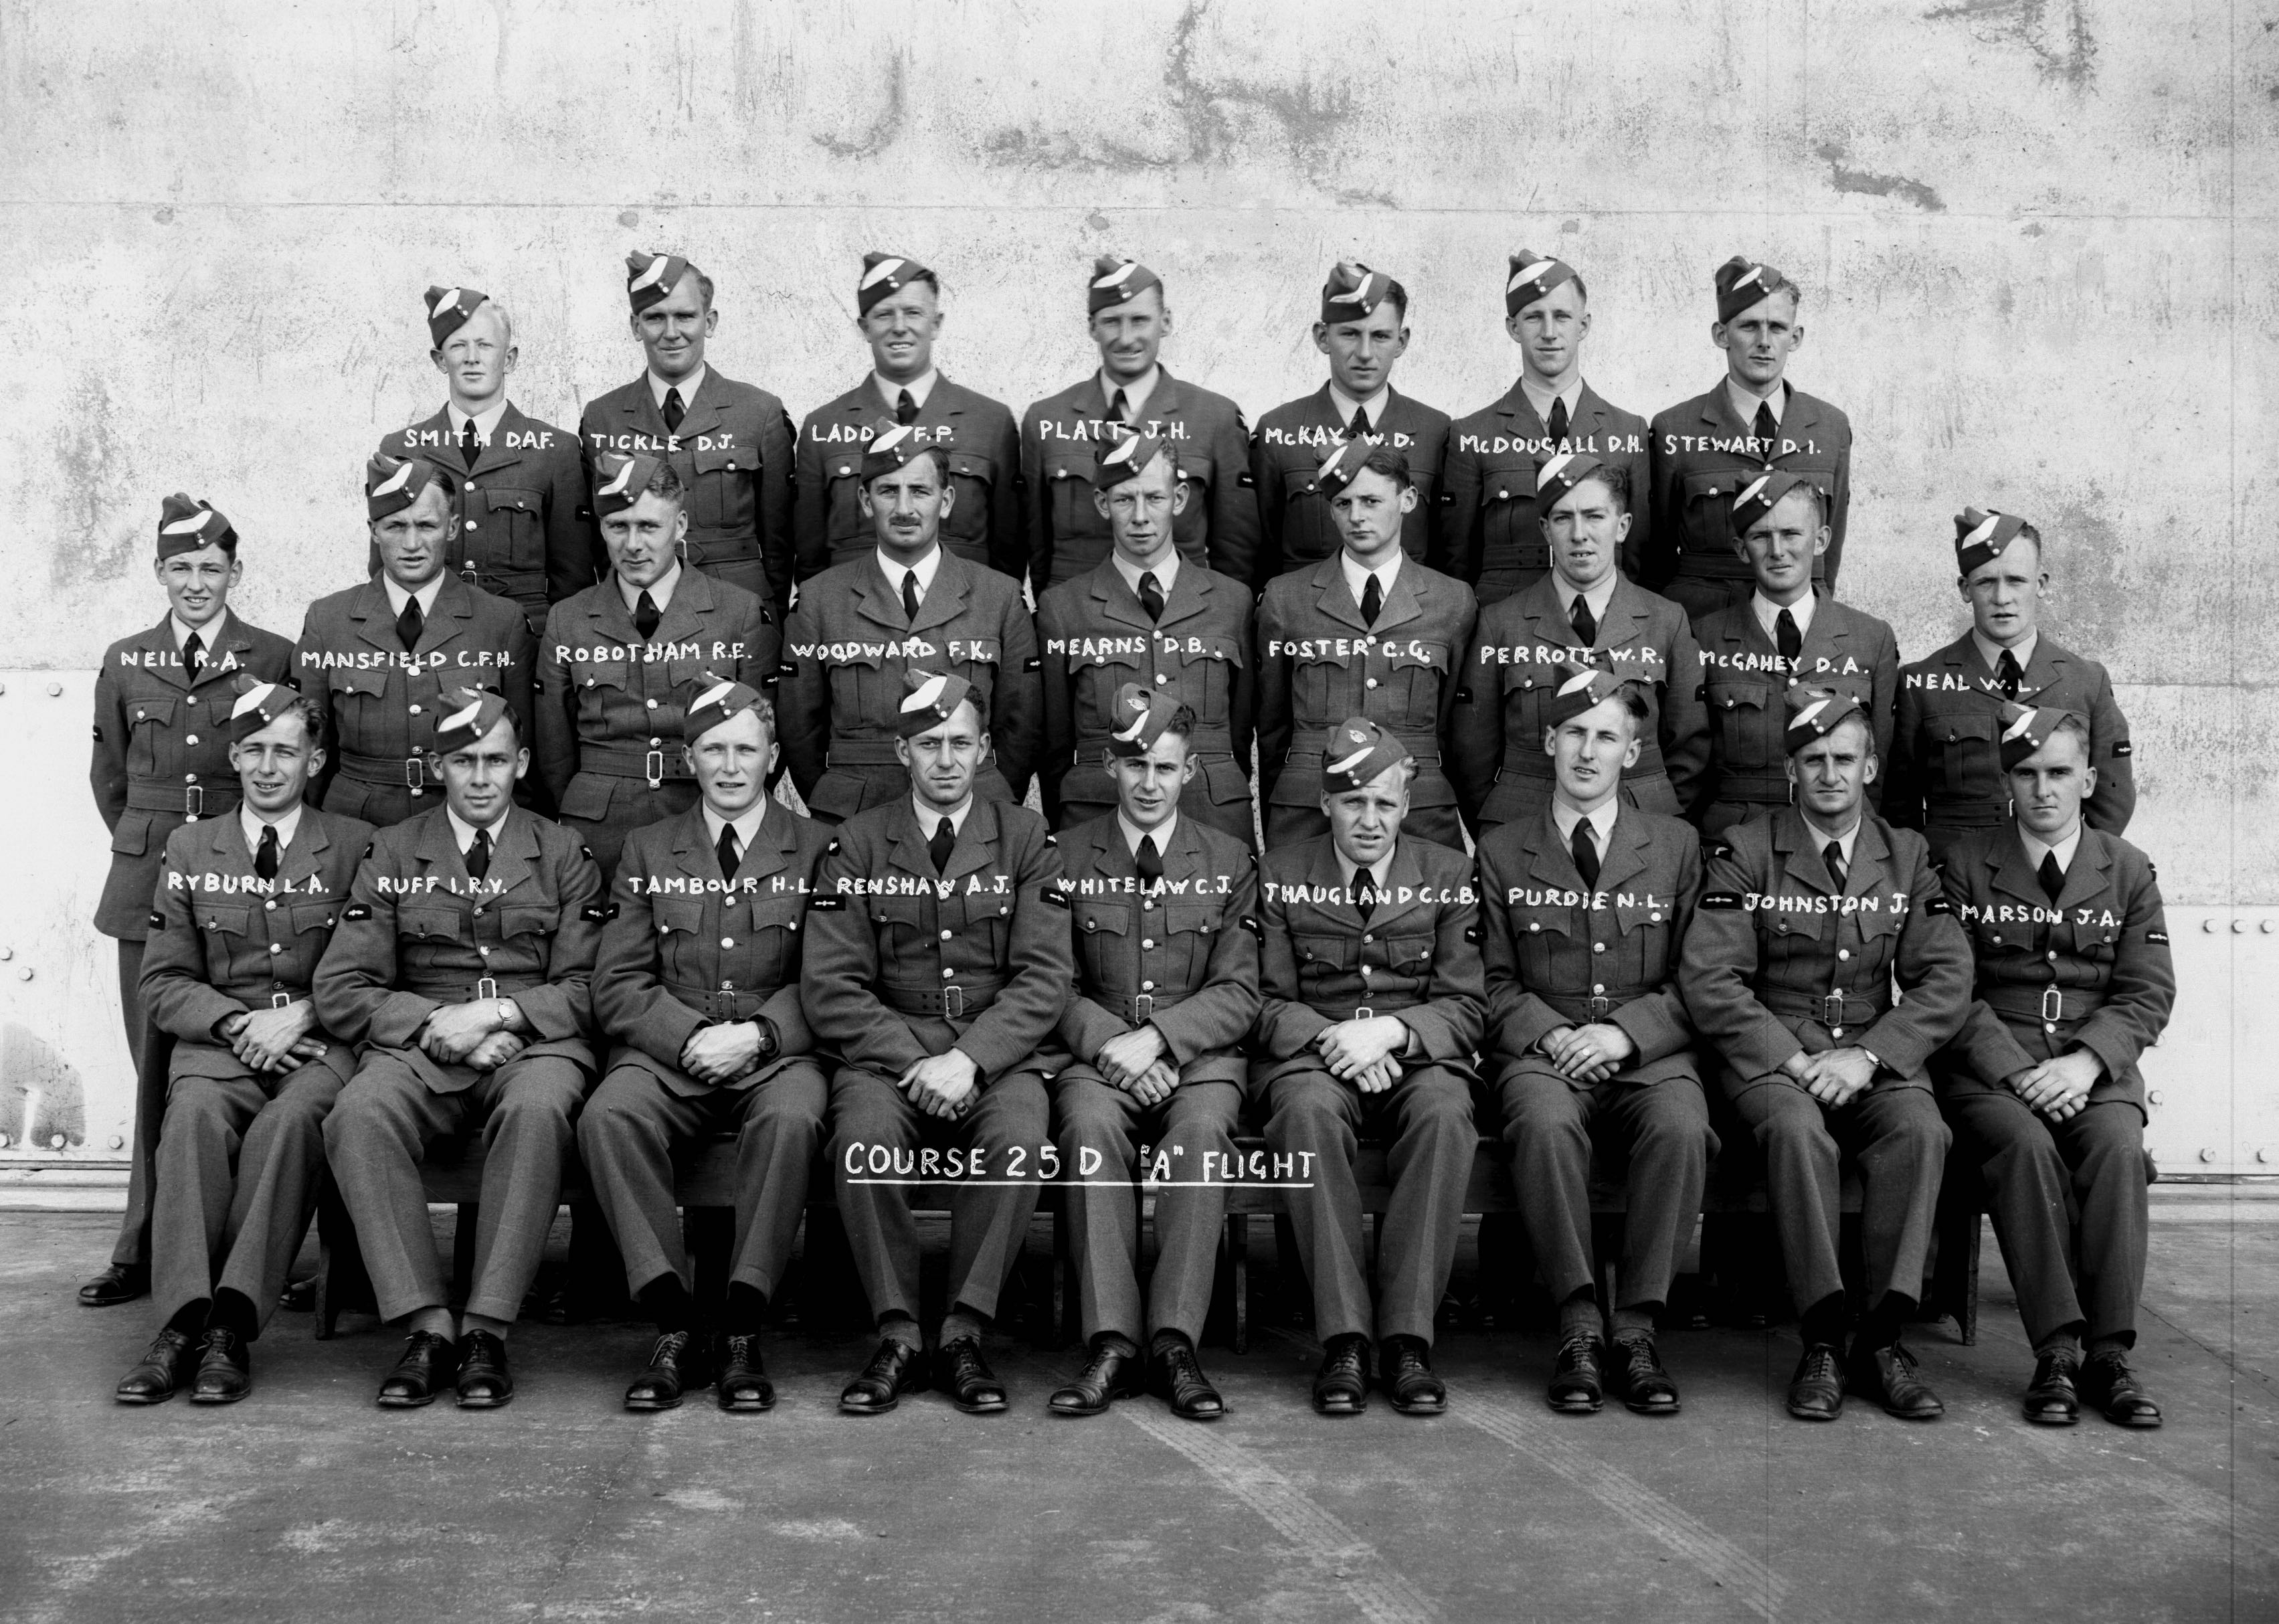 Tambour received his elementary flying training at 4 EFTS, RNZAF Station Whenuapai. The photo shows the ‘A’ Flight of the pilots course 25D, presumably at graduation in February 1942. In the back row are (left to right): D.A.F. Smith, D.J. Tickle, F.P. Ladd, J.H. Platt, W.D. McKay, D.H. McDougall, D.I. Stewart; In the middle row: R.A. Neil, C.F.H. Mansfield, R.E. Robotham, F.K. Woodward, D.B. Mearns, C.G. Foster, W.R. Perrott, D.A. McGahey, W.L. Neal; and in the front row: L.A. Ryburn, I.R.V Ruff, H.L. Tambour, A.J. Renshaw, C.J. Whitelaw, C.C.B. Thaugland, N.L. Purdie, J. Johnston, J.A. Marson. (Air Force Museum of New Zealand Photograph Collection).